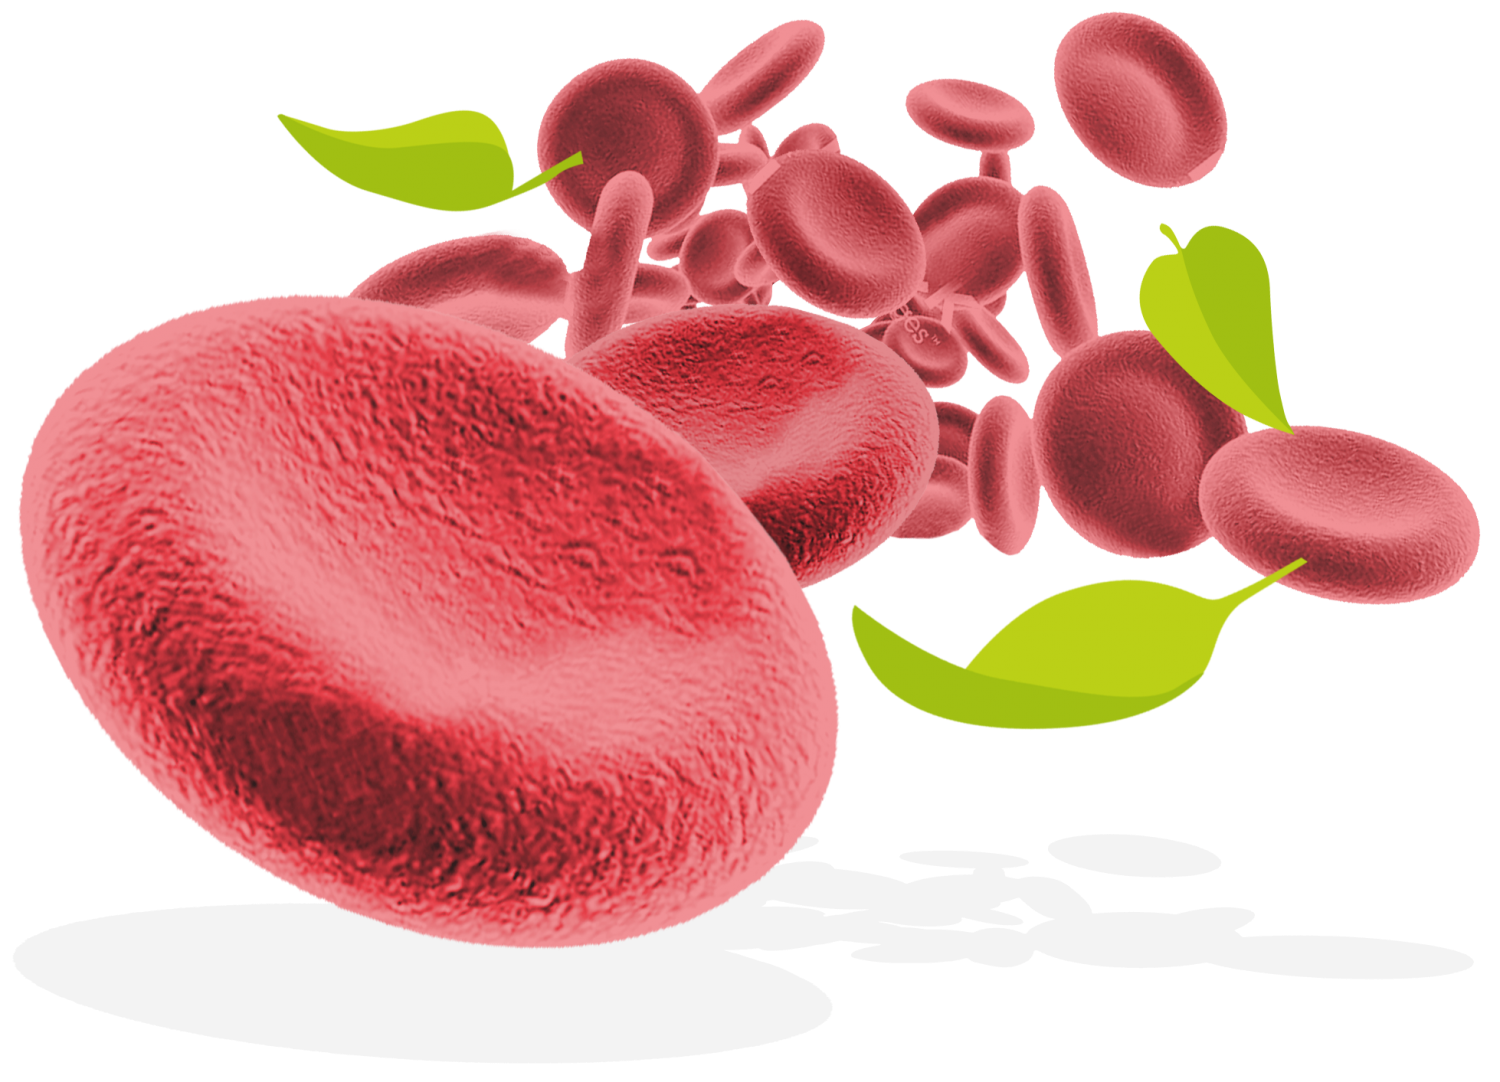 Red blood cells and leaves